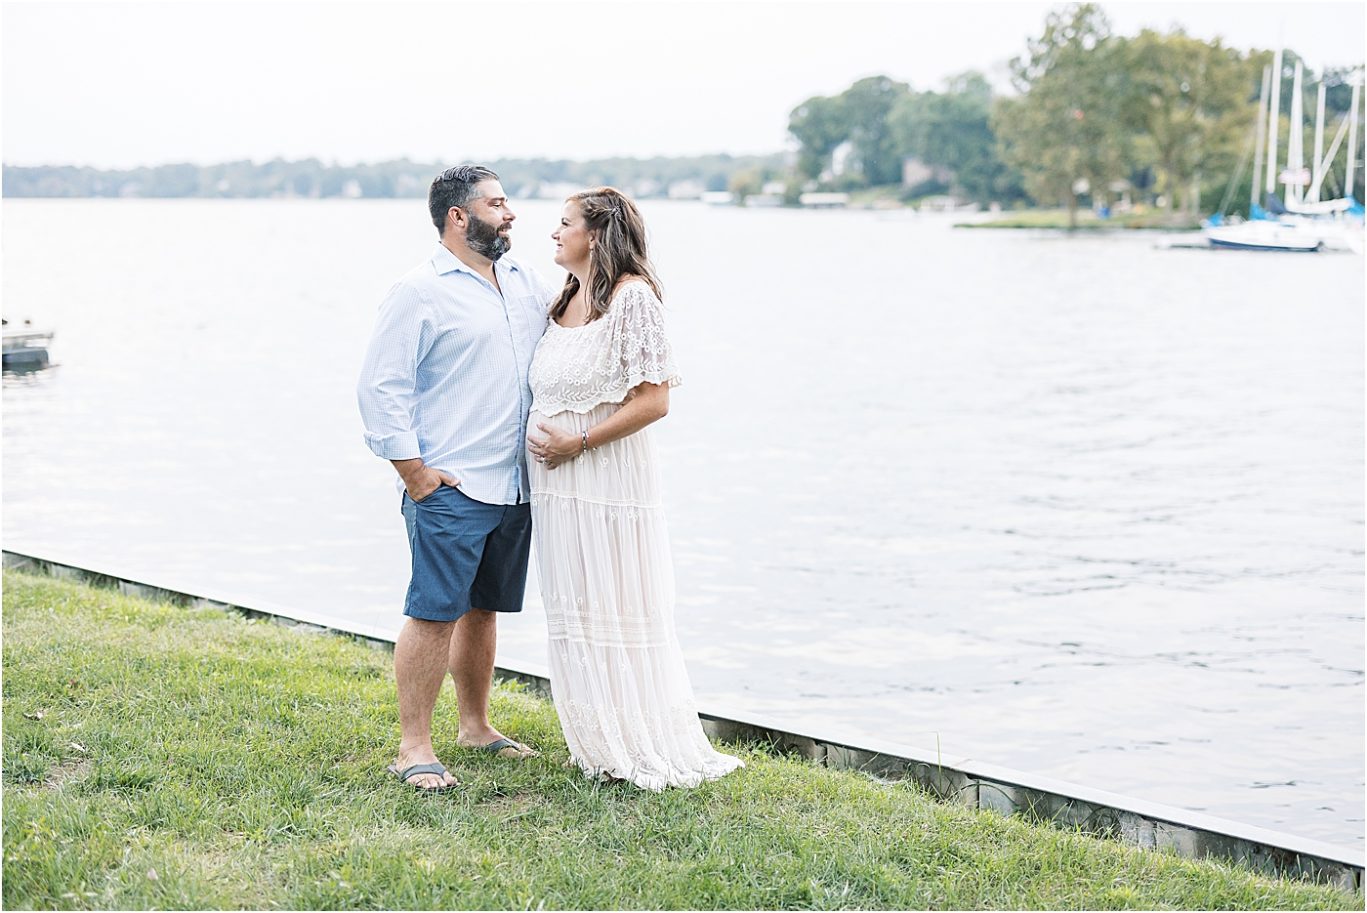 Maternity session by the water on Geist Reservoir | Lindsay Konopa Photography